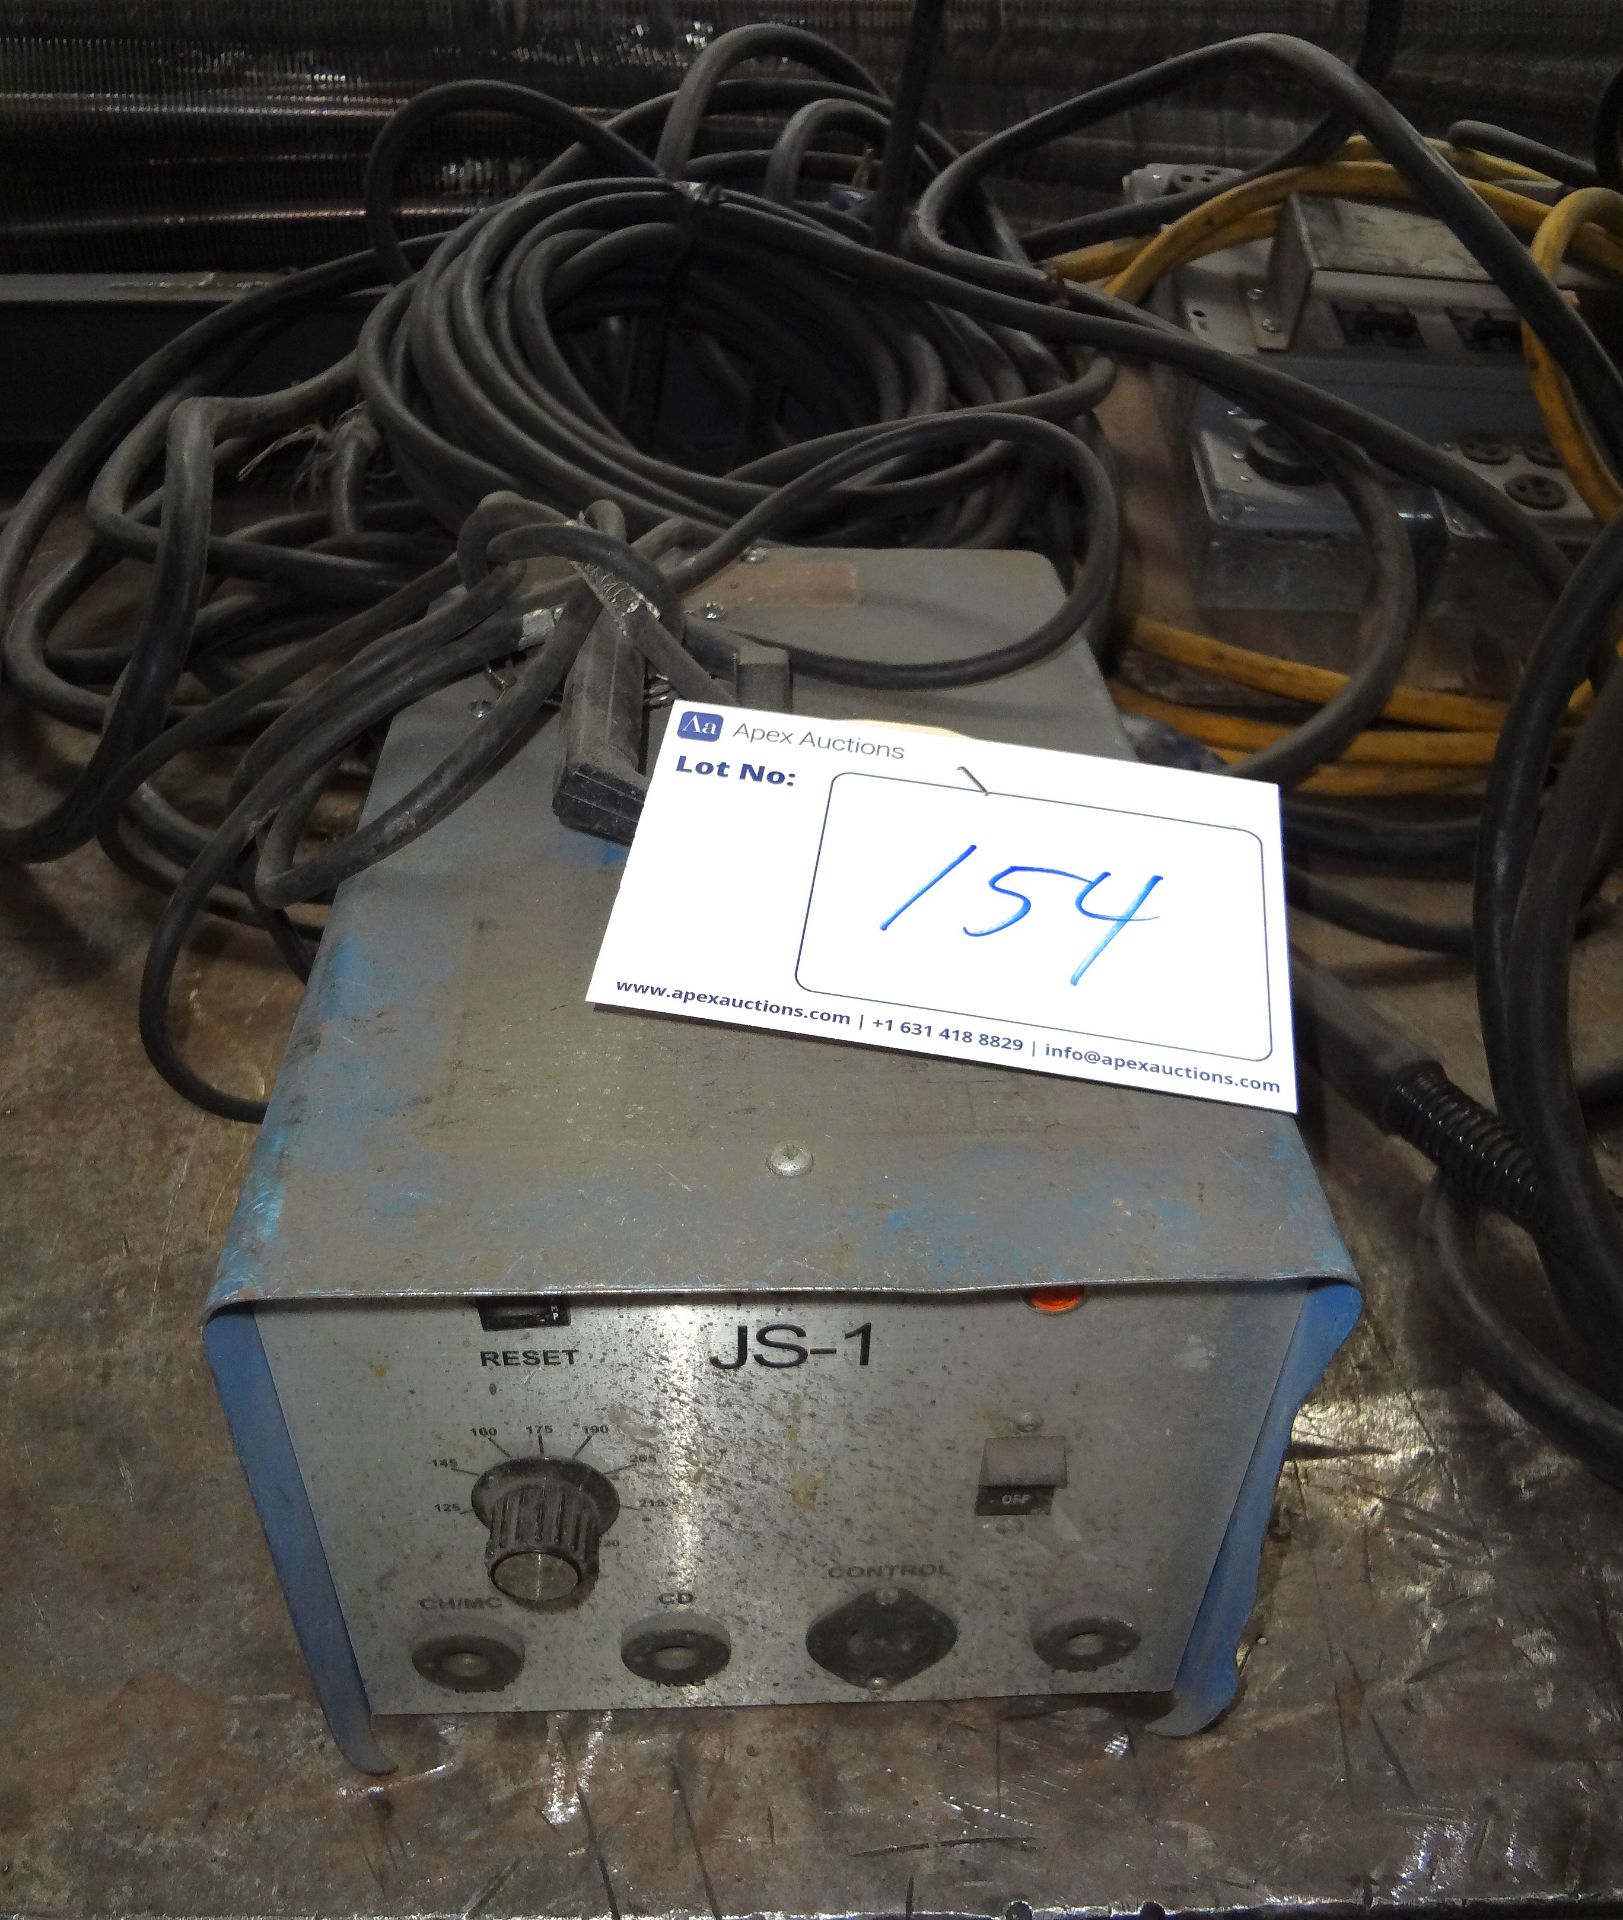 AGM MDL. JG-1 PORTABLE PIN AND STUD WELDER